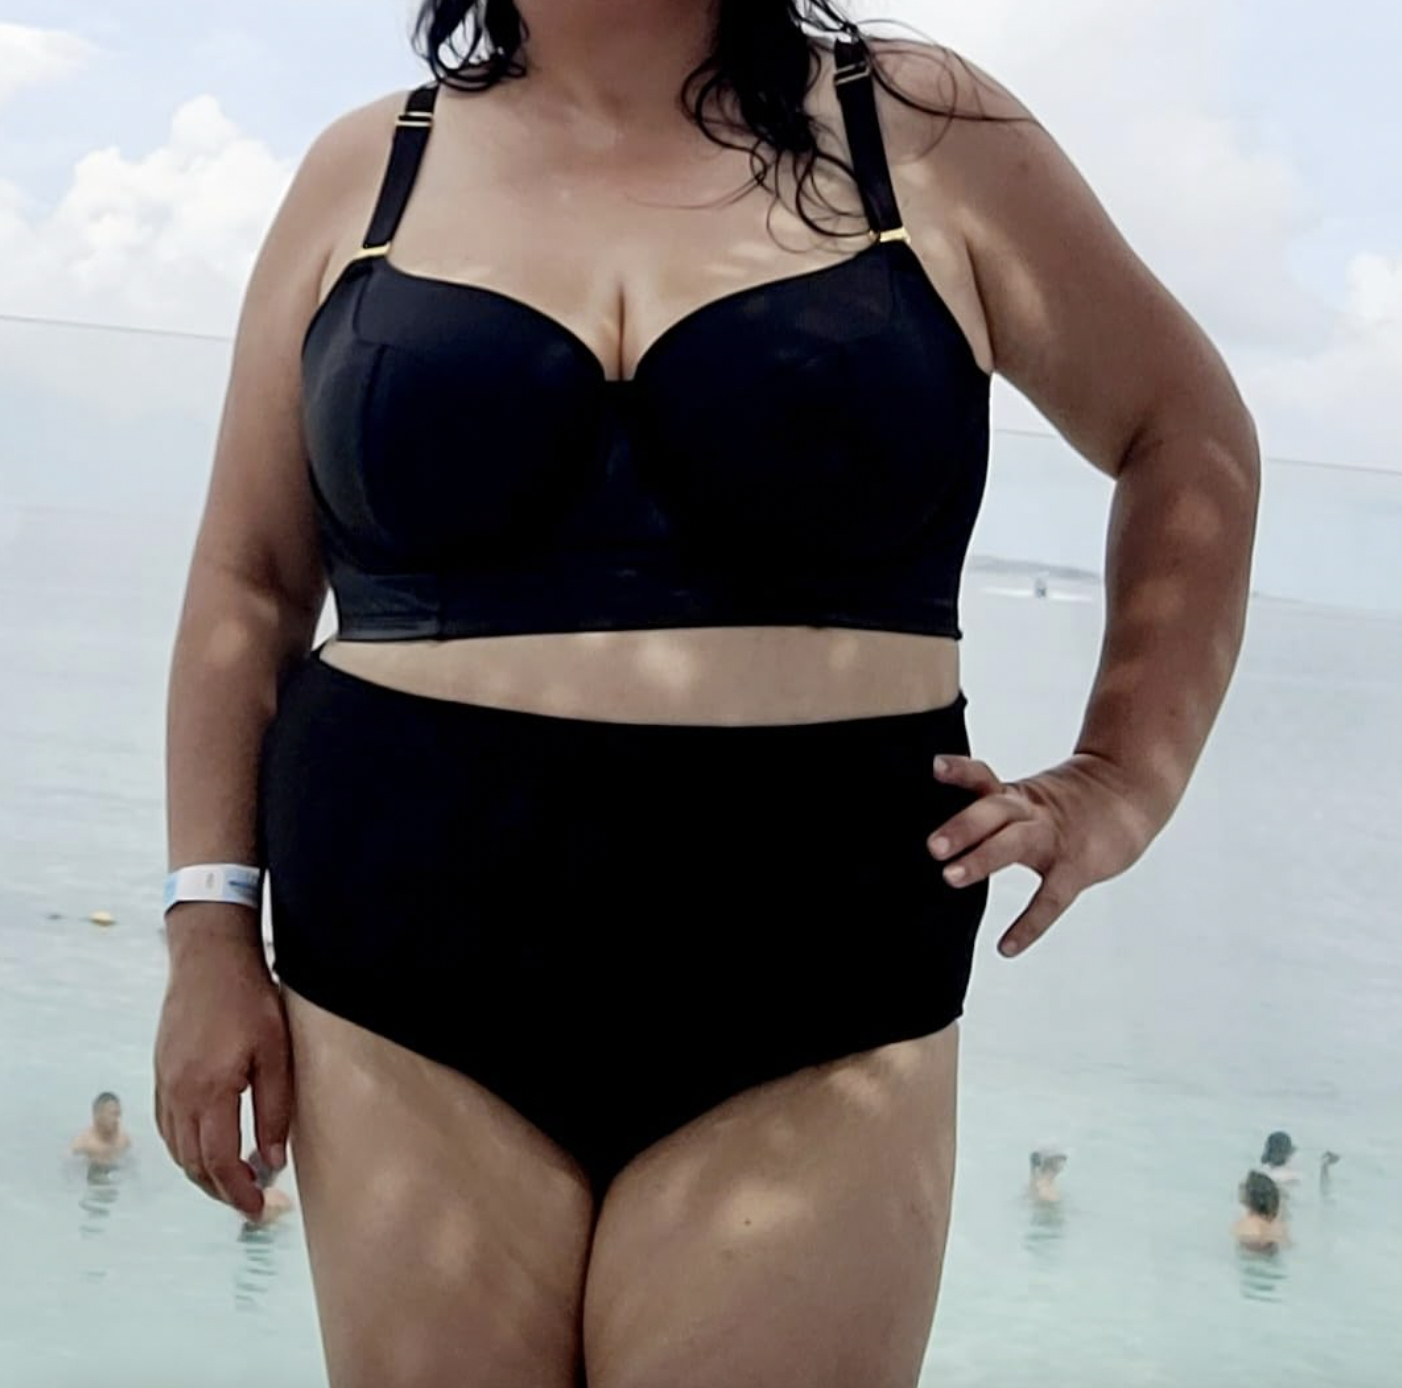 reviewer in black two-piece swimsuit at beach, hands on hips, others swimming in background